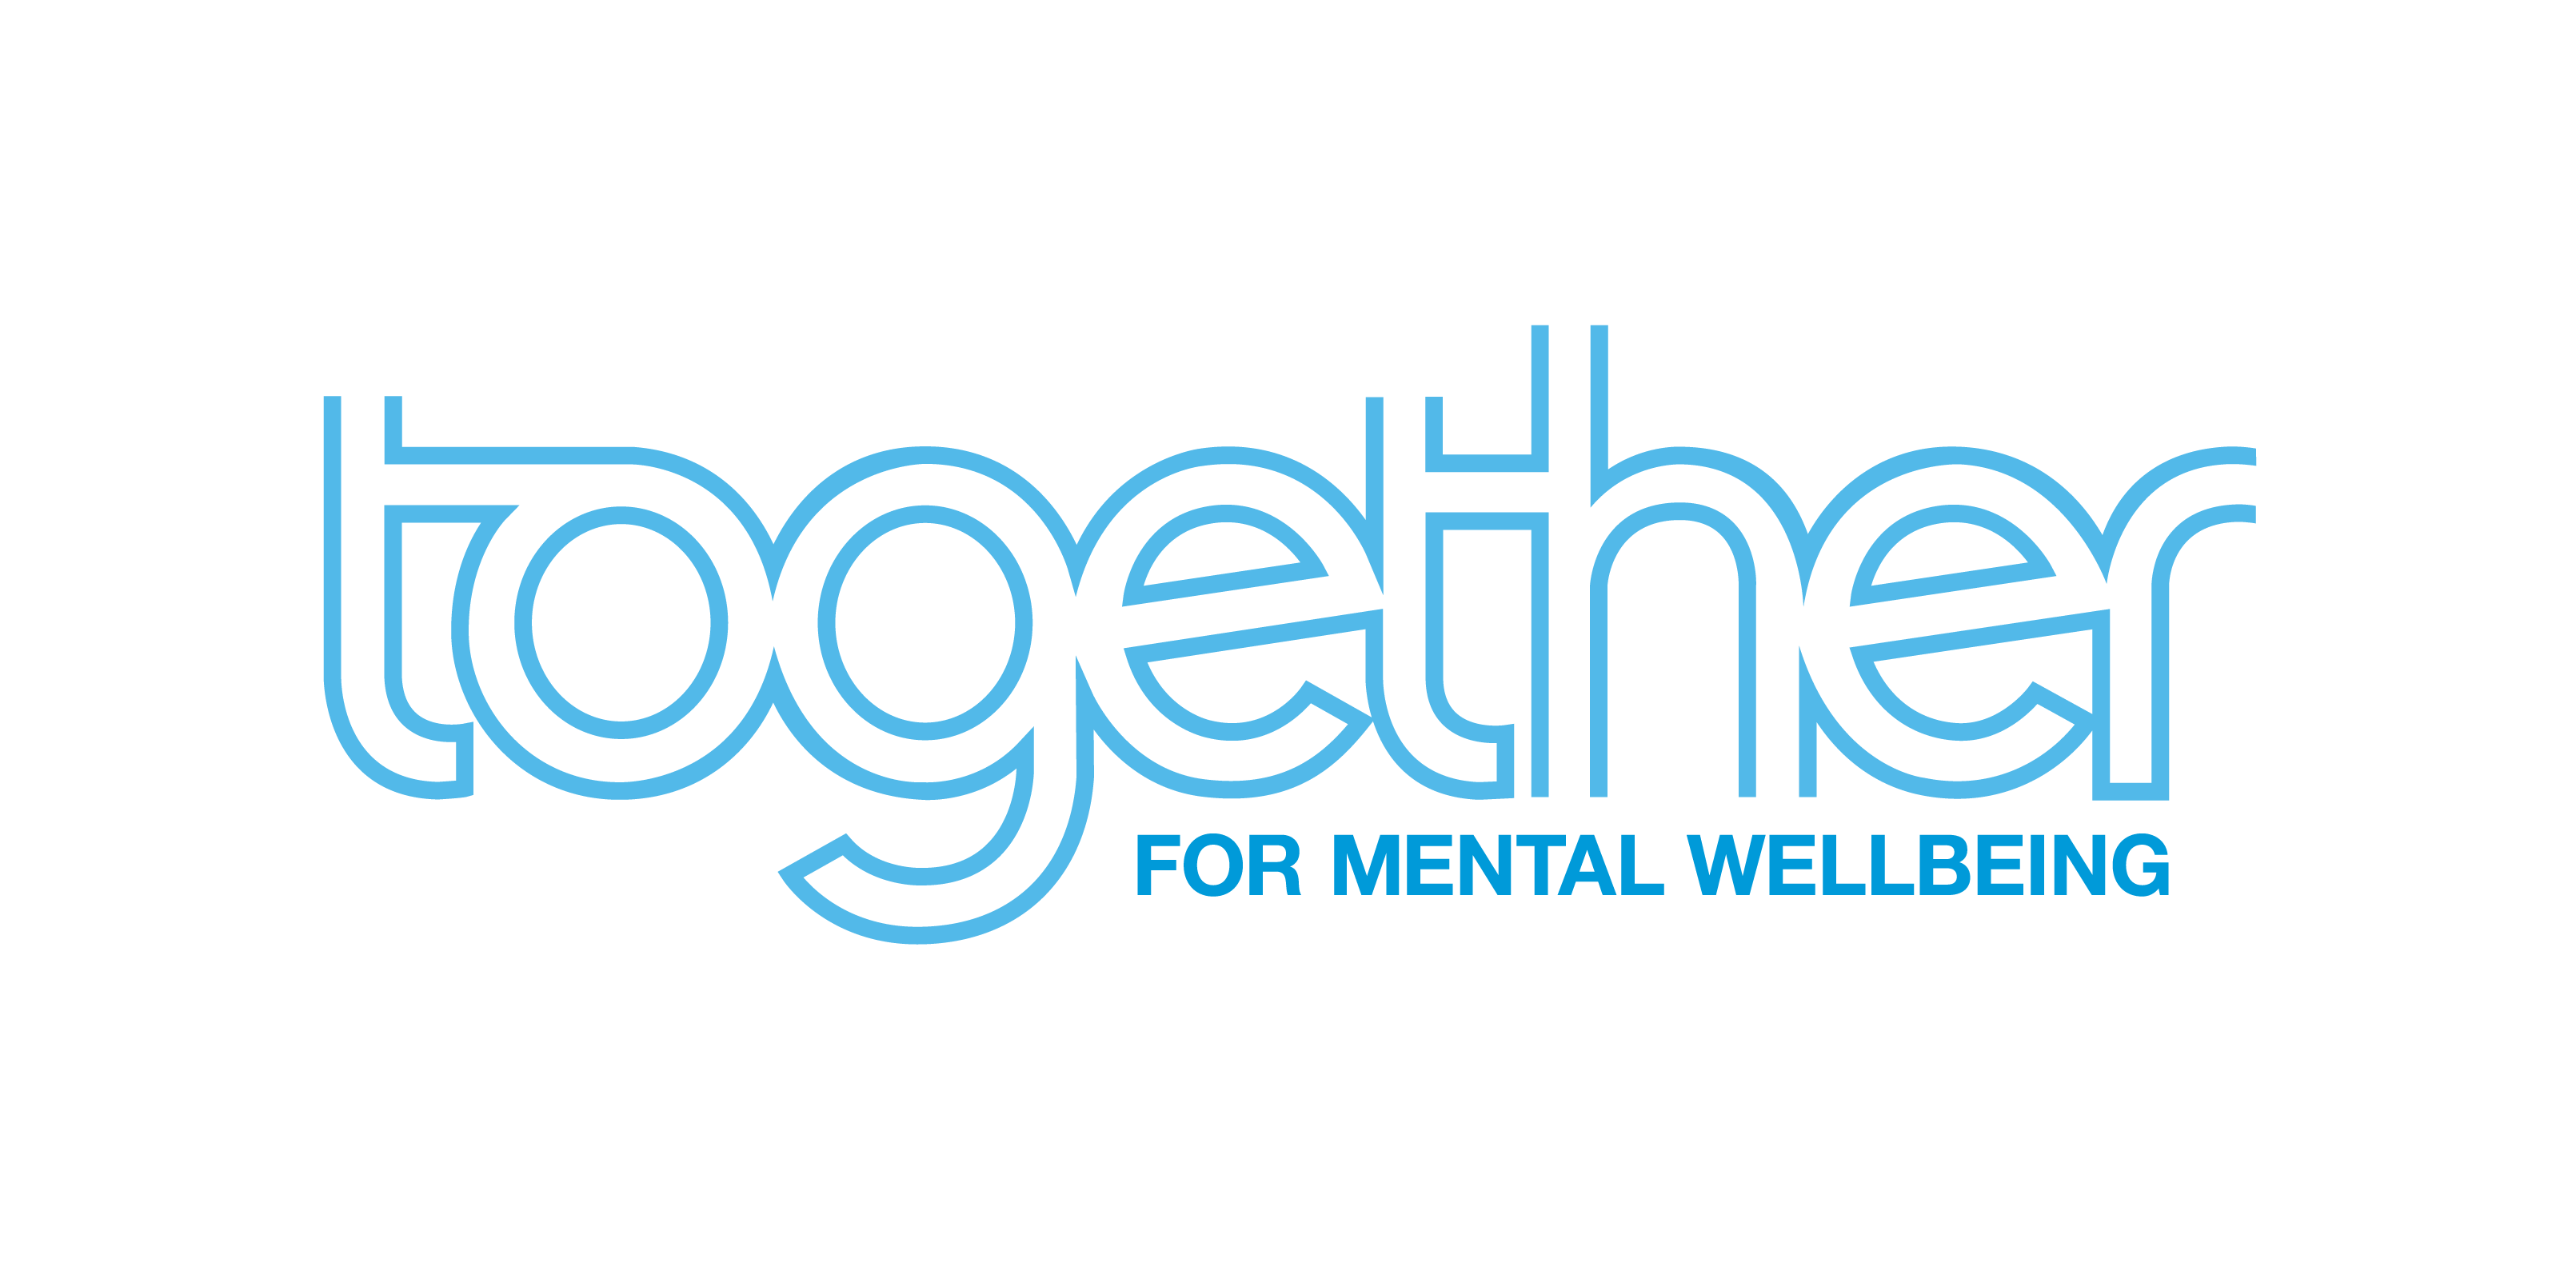 Together for Mental Wellbeing